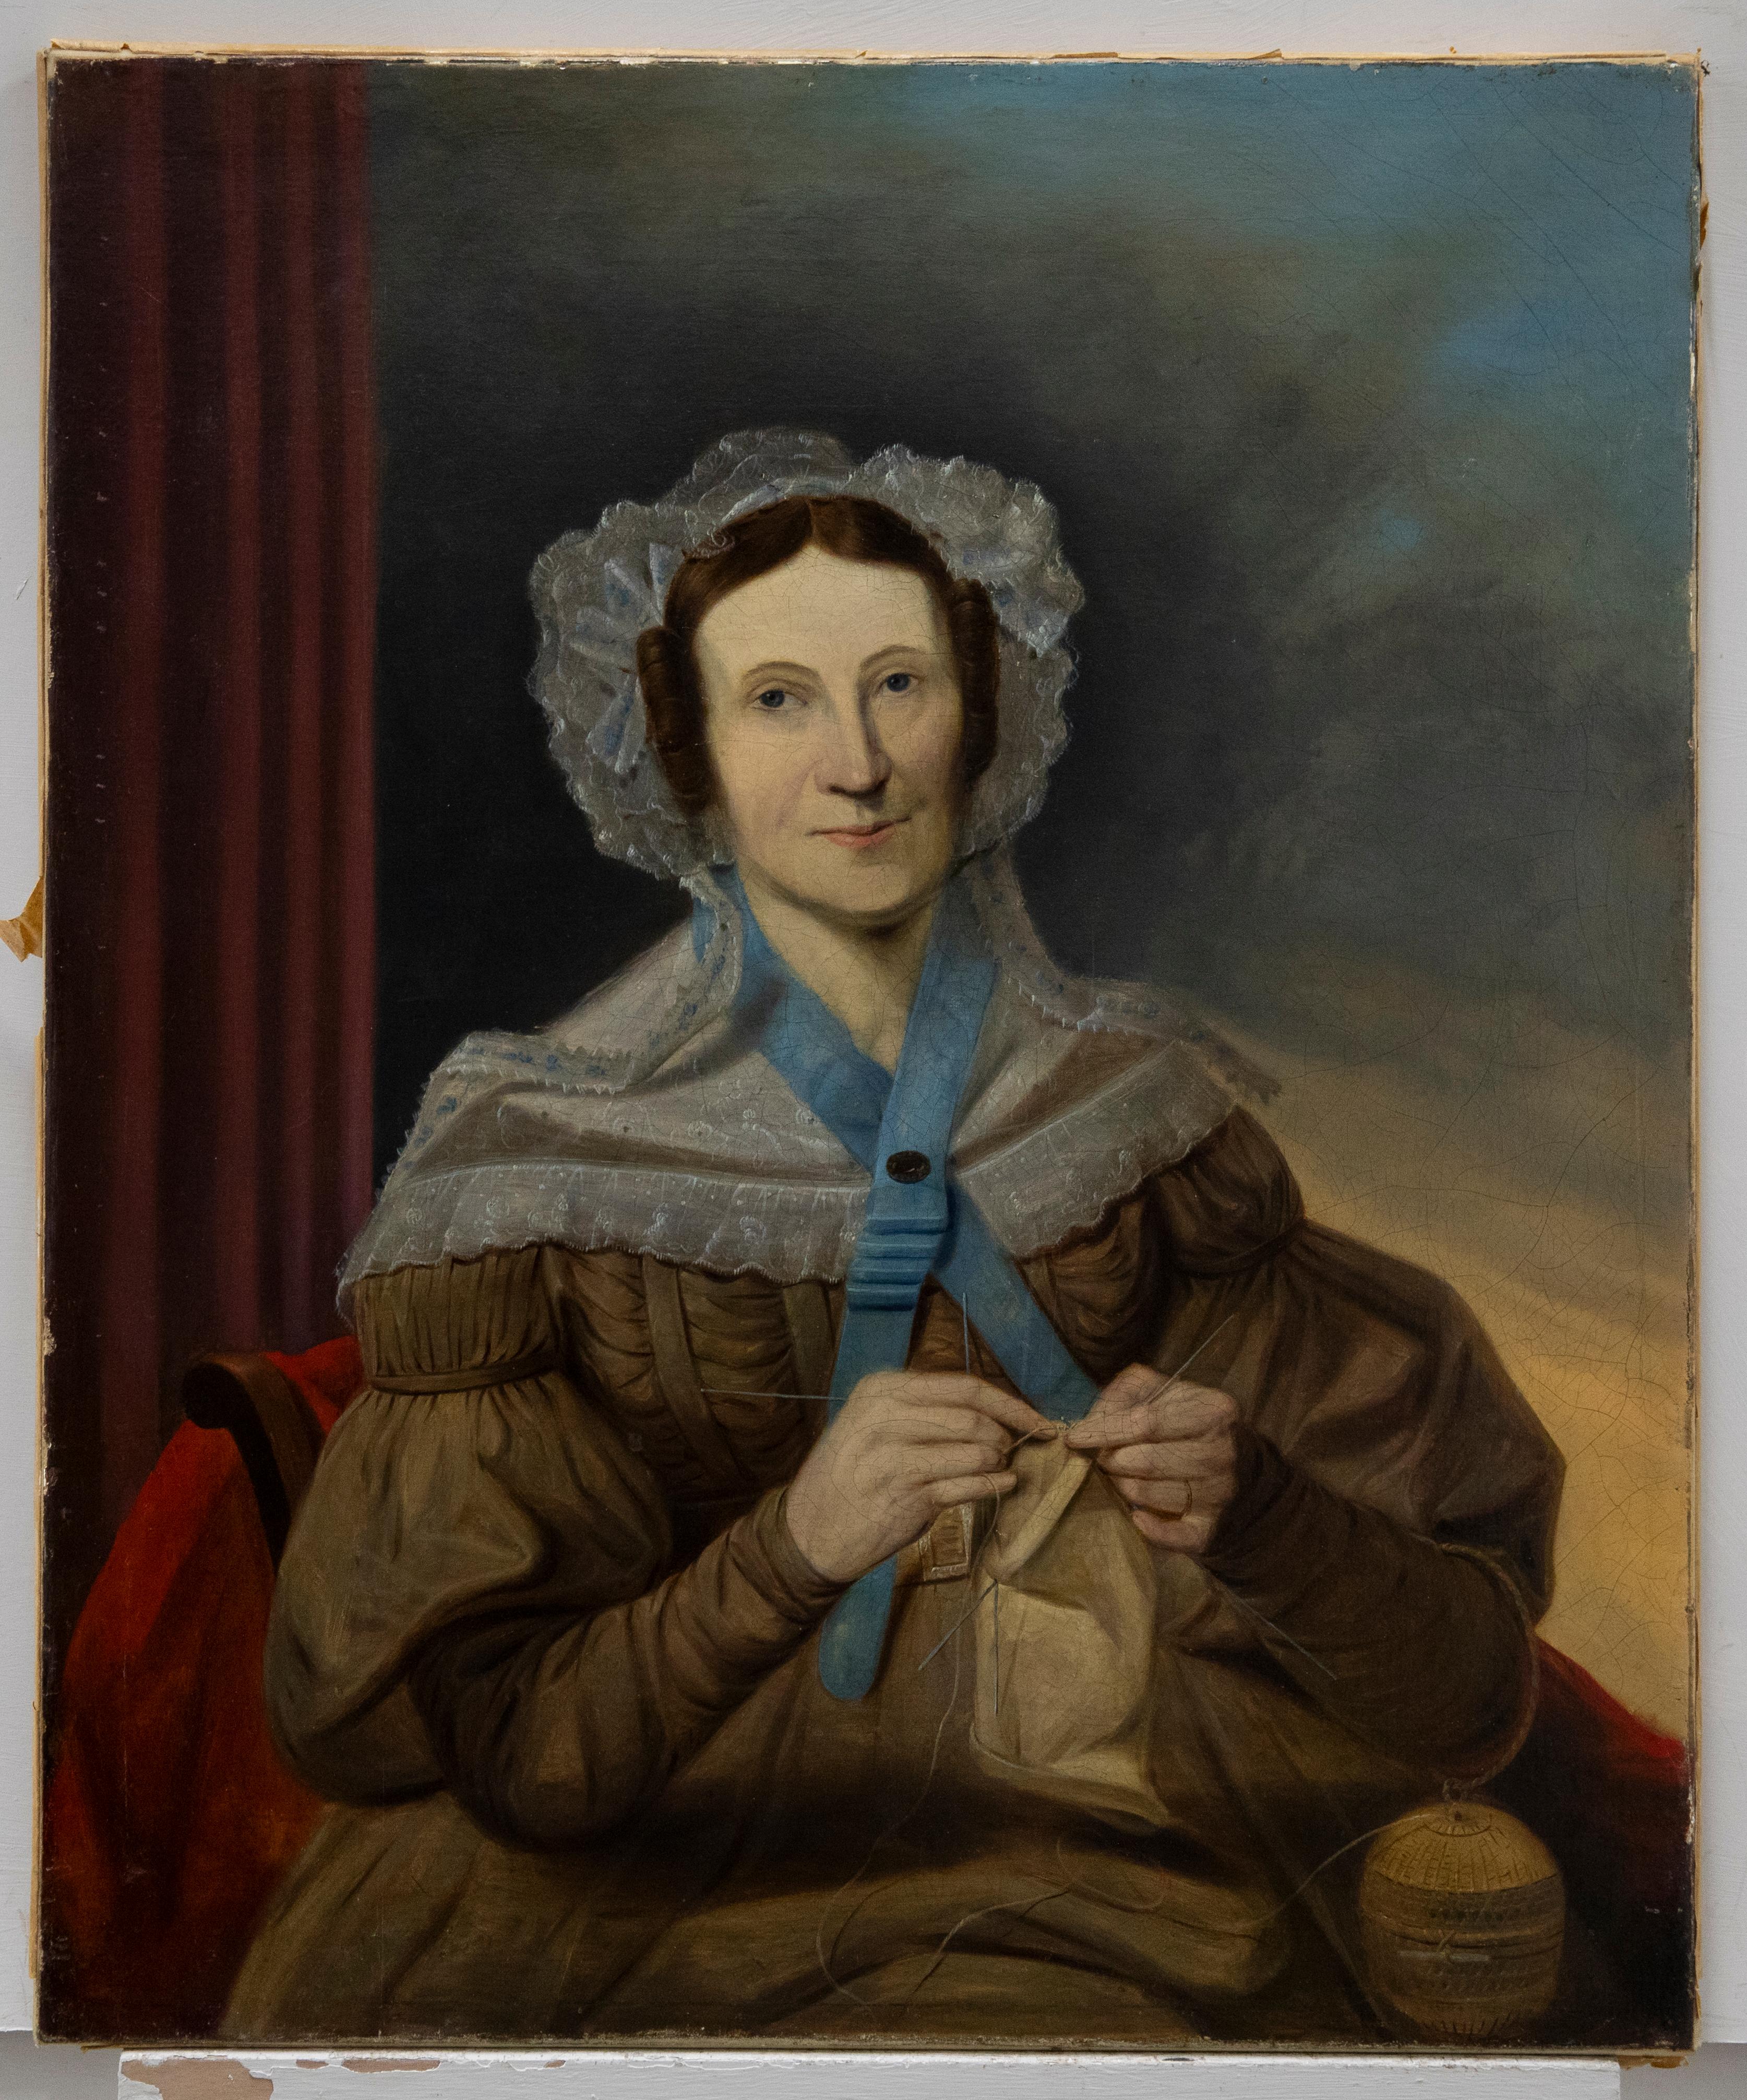 Unknown Portrait Painting - Mid 19th Century Oil - The Stocking Knitter